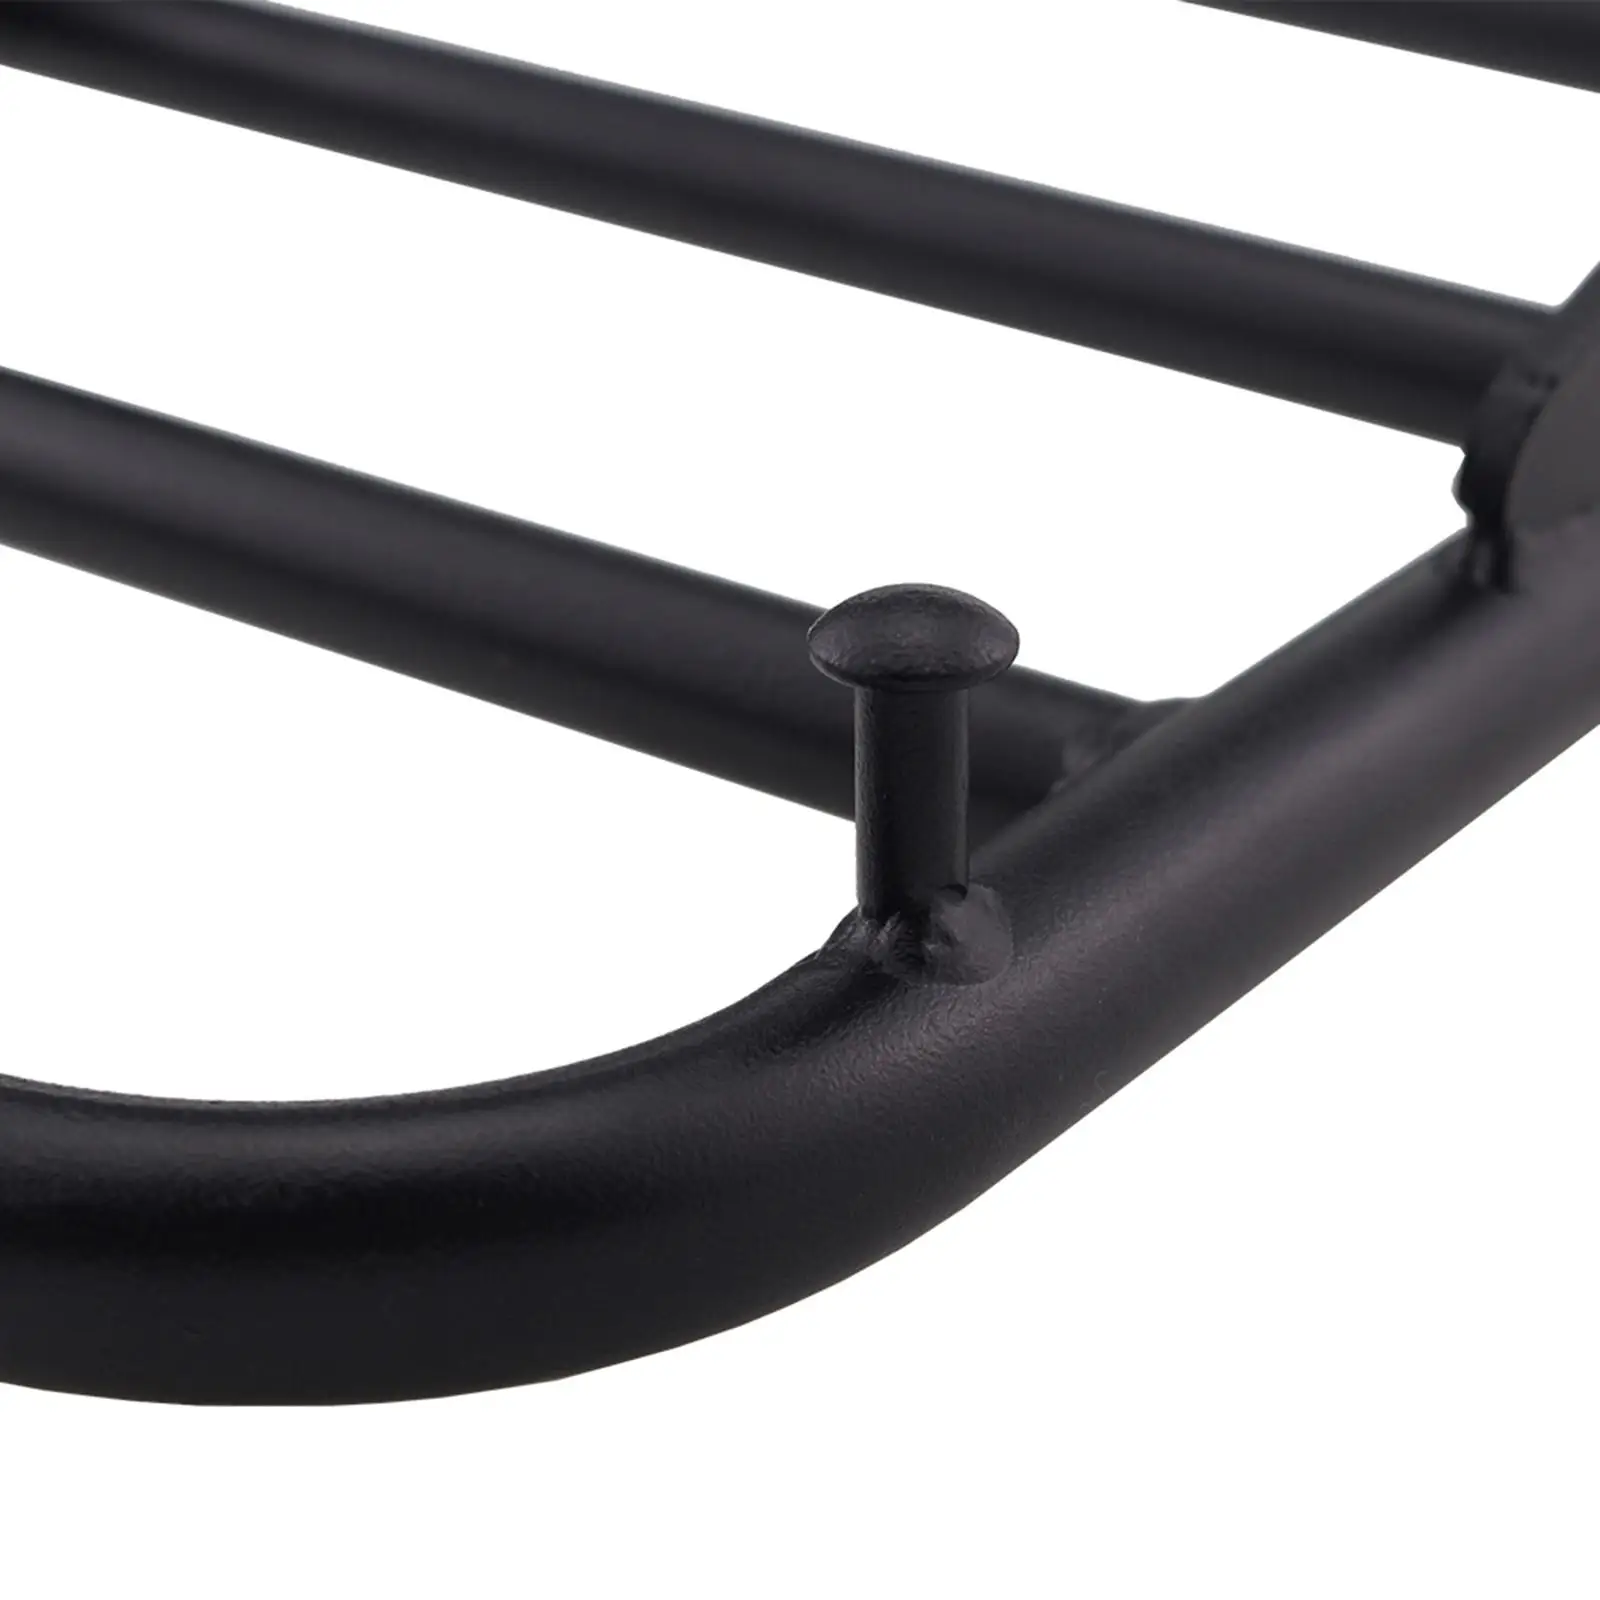 Motorcycle Rear Luggage Rack Support Carrier Shelf Cargo Frame Fits for Yamaha Klx 230/R